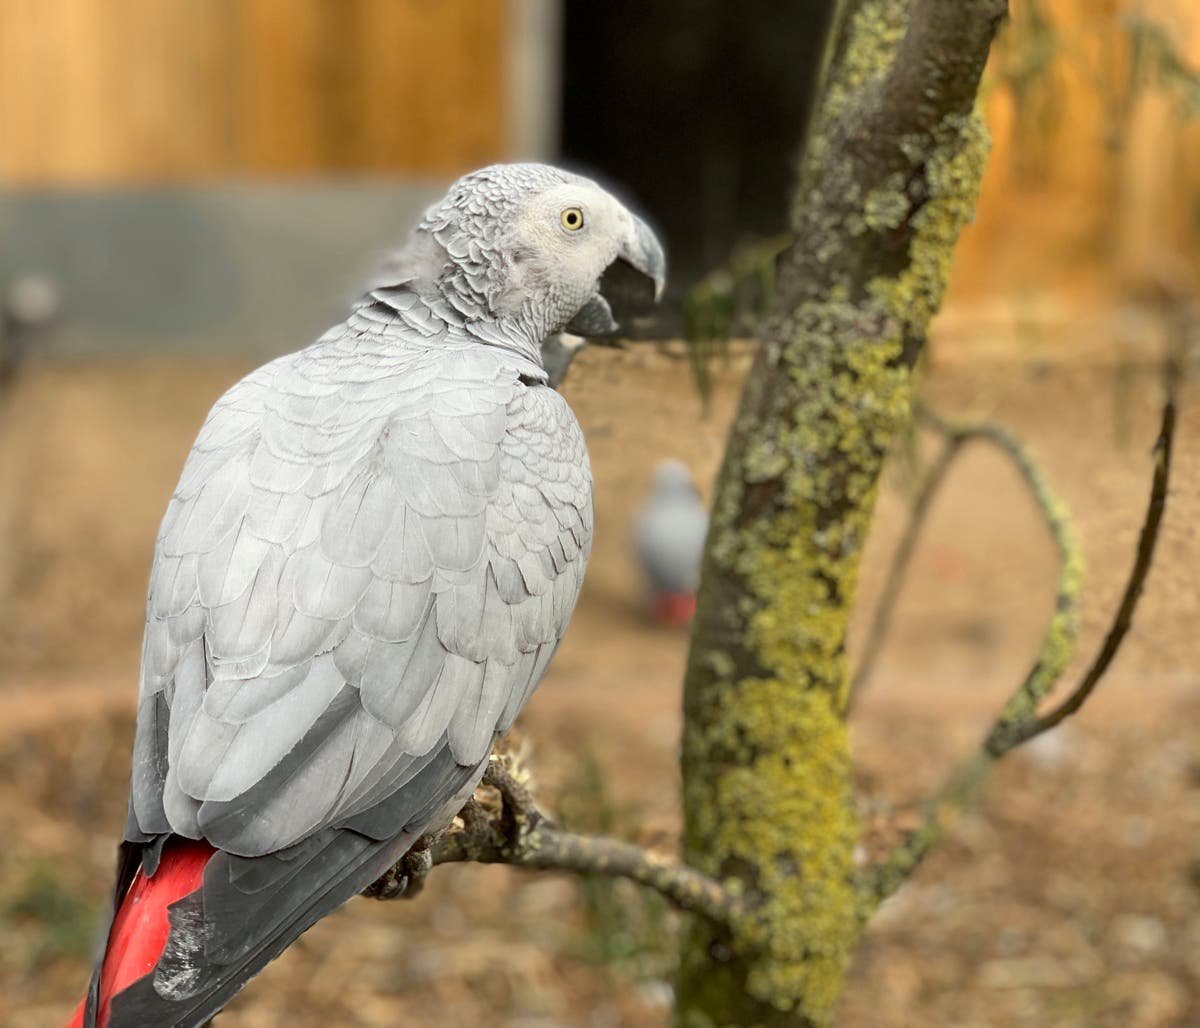 Foul-mouthed parrots moved with other birds to curb swearing habit